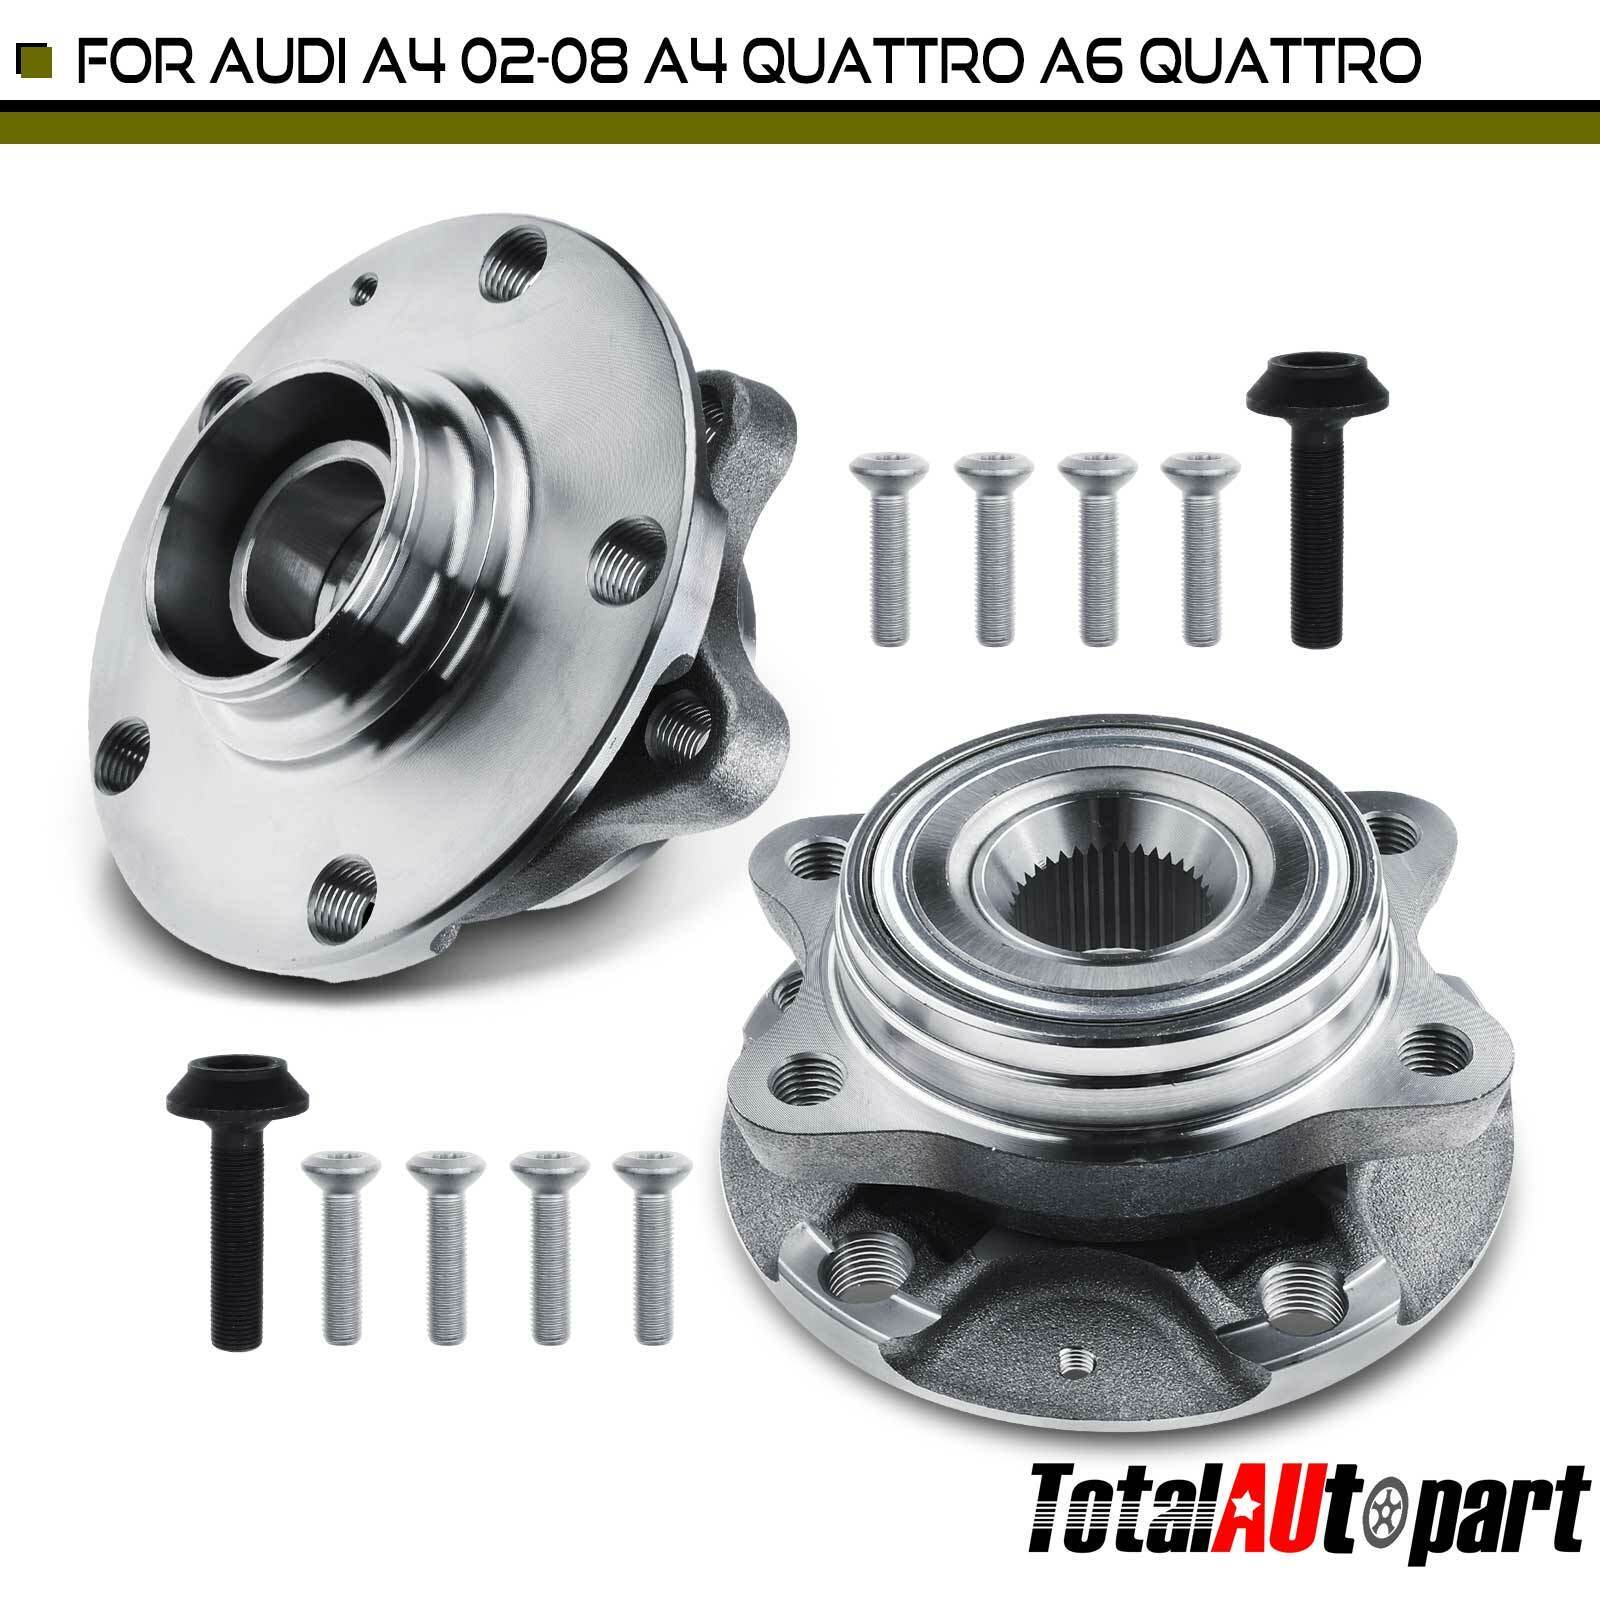 2x Wheel Hub Bearing Assembly for Audi A4 02-08 A6 A6 Quattro 02-04 RS4 Front 